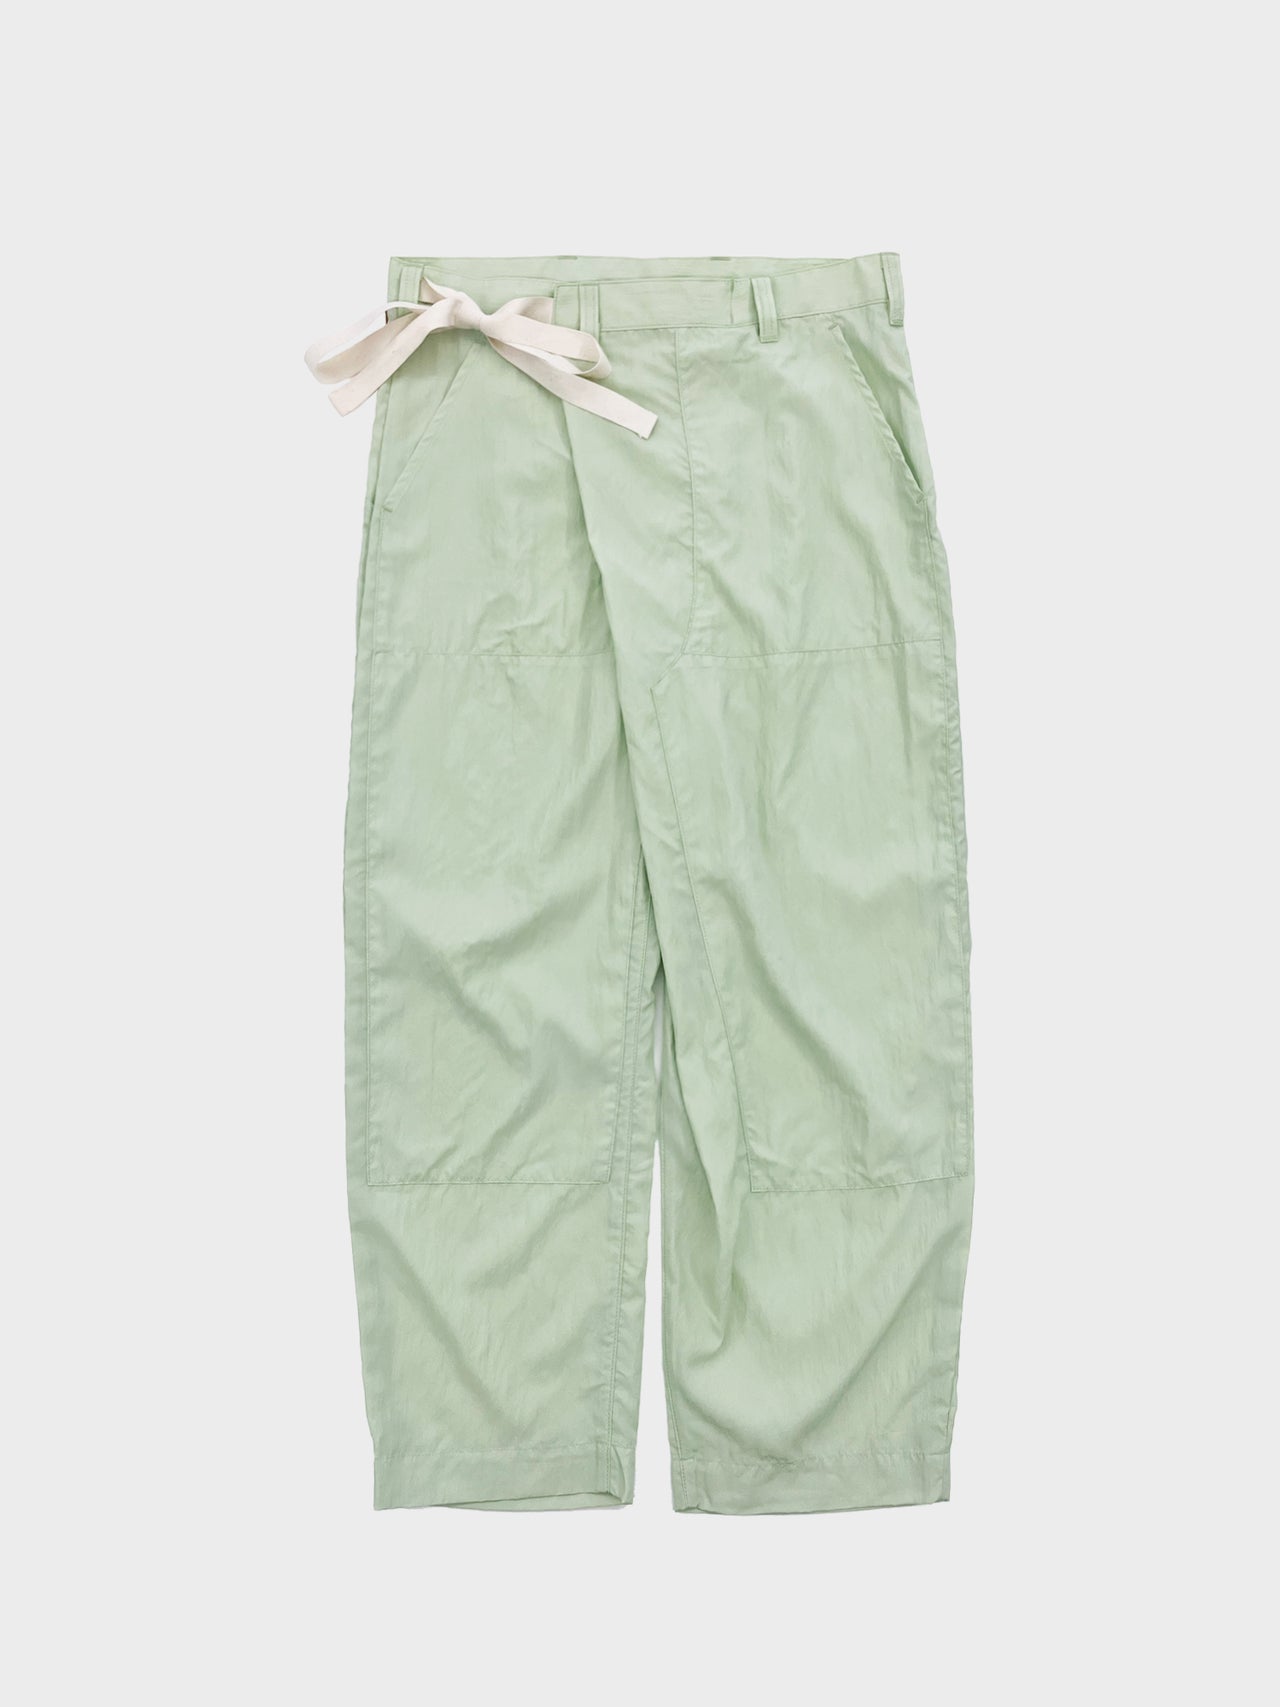 【20%OFF】ASEEDONCLOUD / HW blacksmith trouser (PALE GREEN)